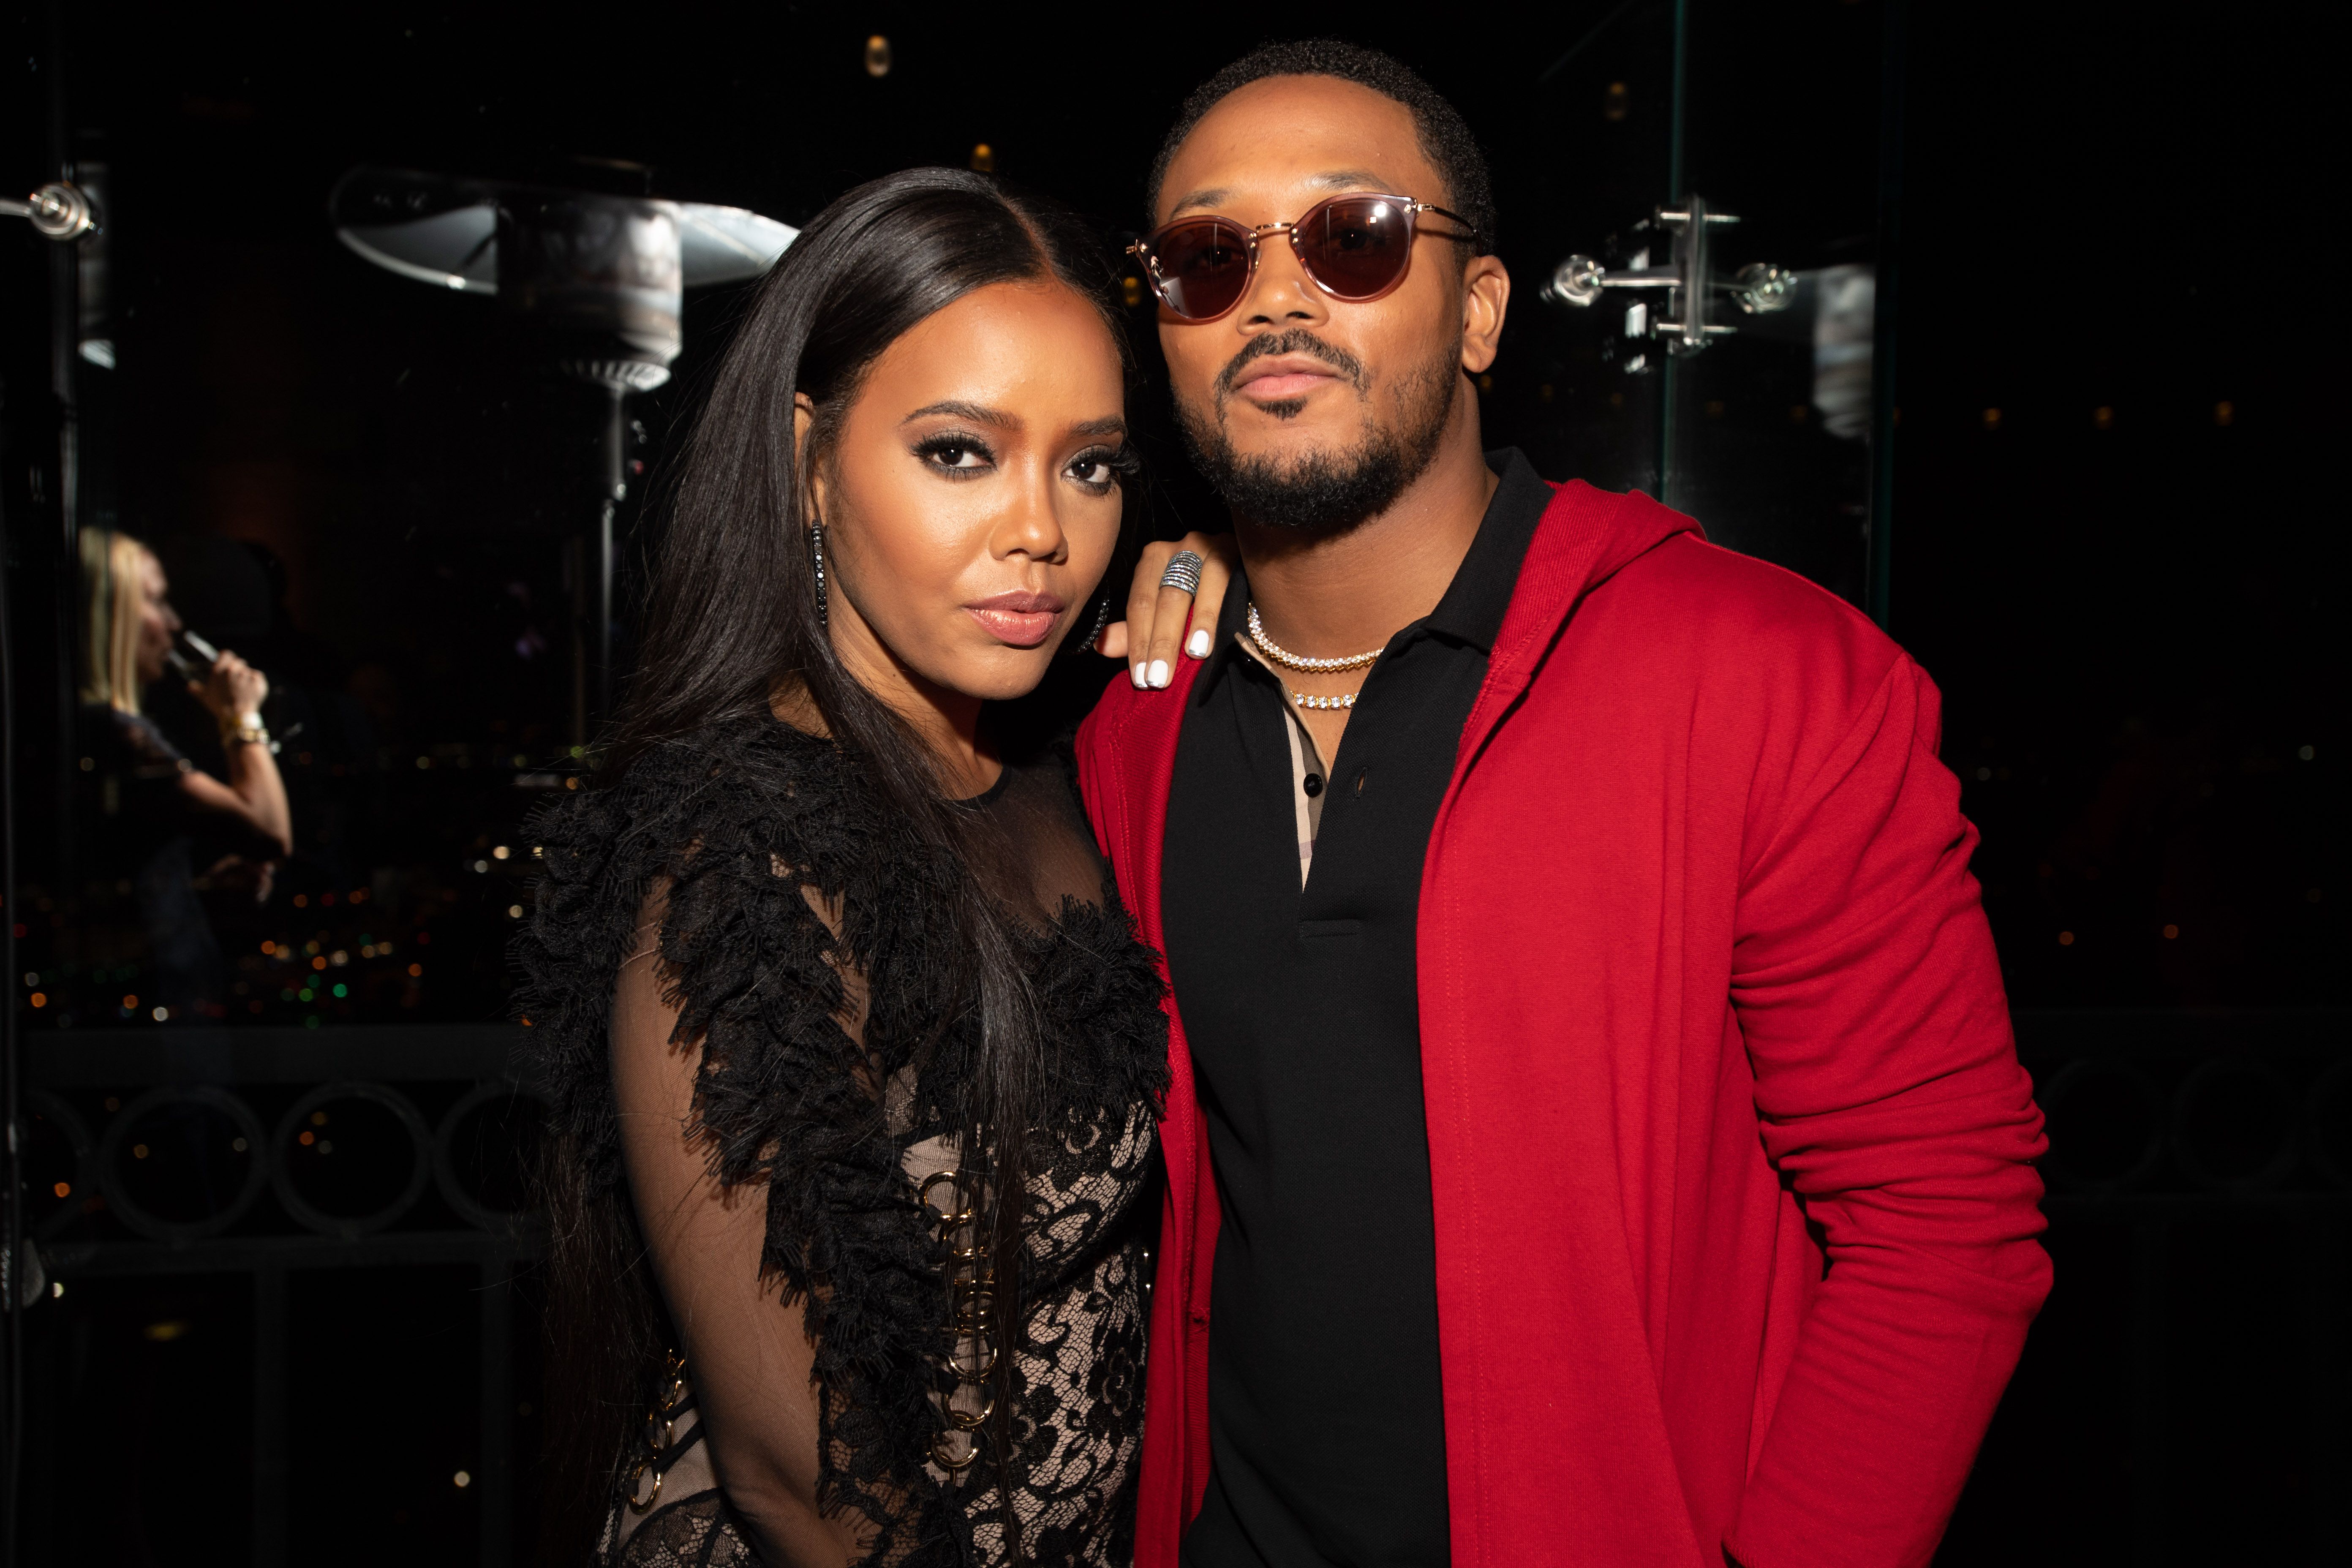 Angela Simmons and Romeo Miller at the Premiere of WE TV's "Growing Up Hip Hop" Season 4/ Source: Getty Images